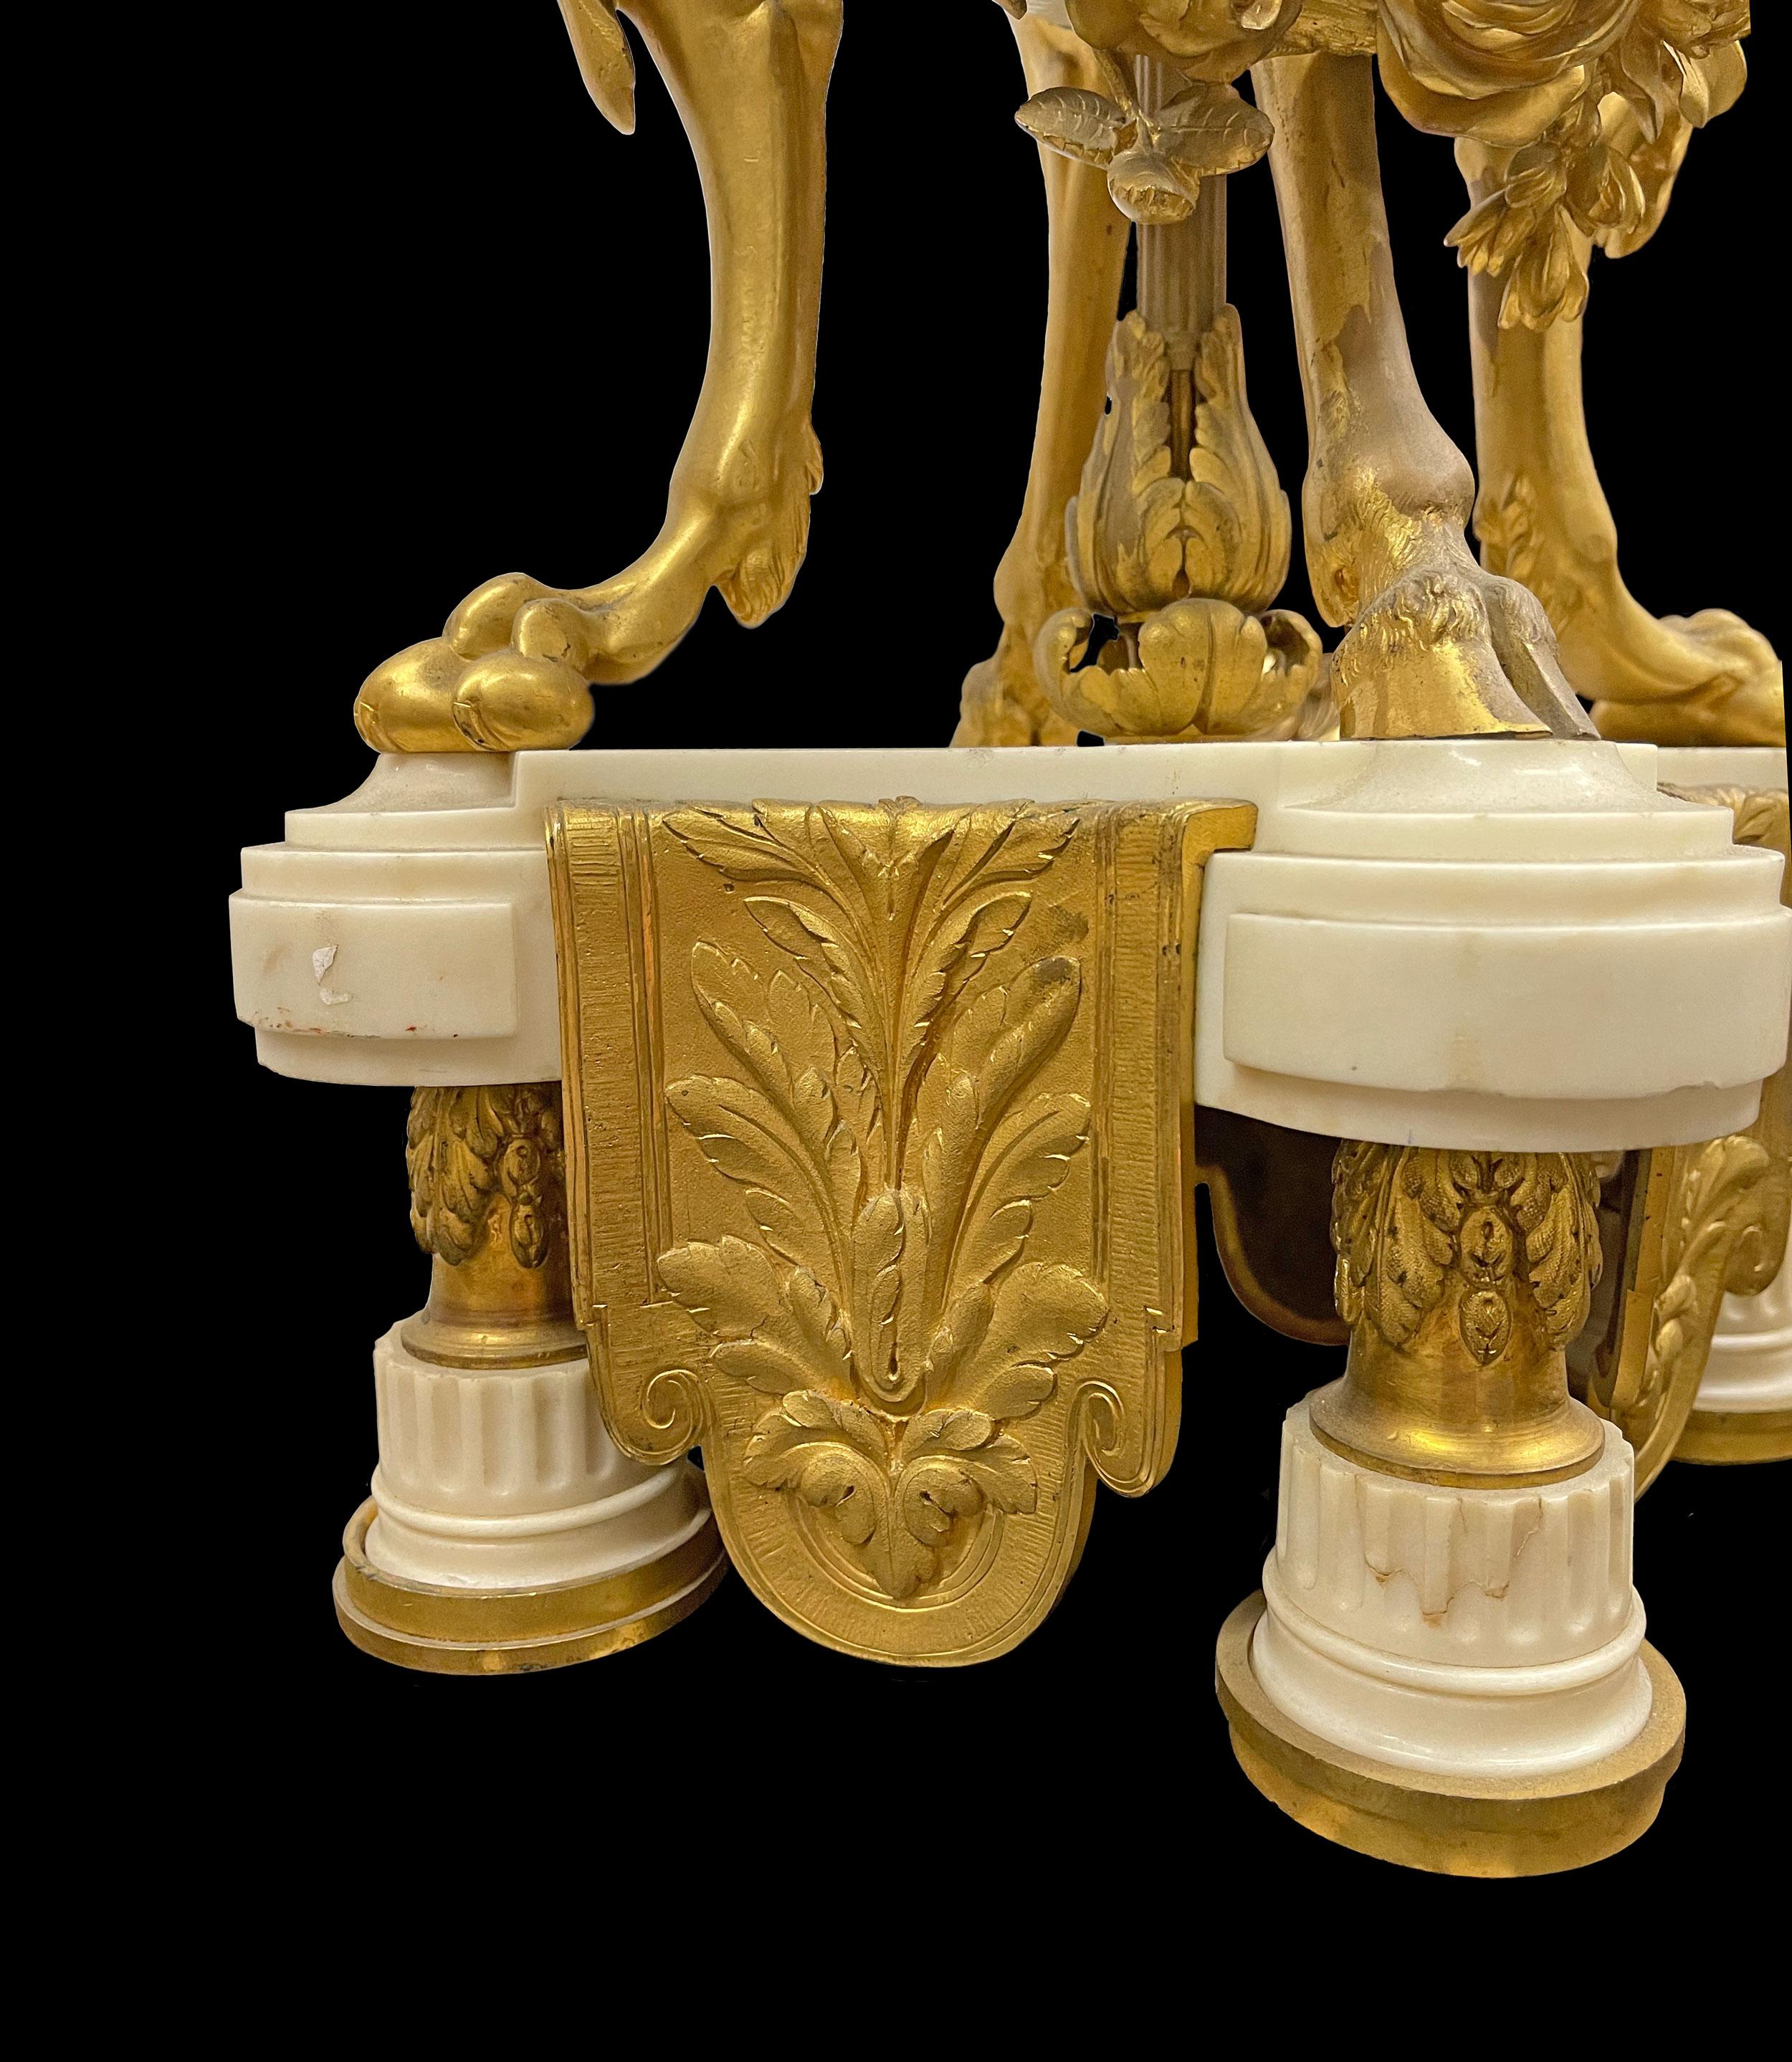 19th Century Pair of French Ormolu & White Marble Candelabras, by Marchand a Paris For Sale